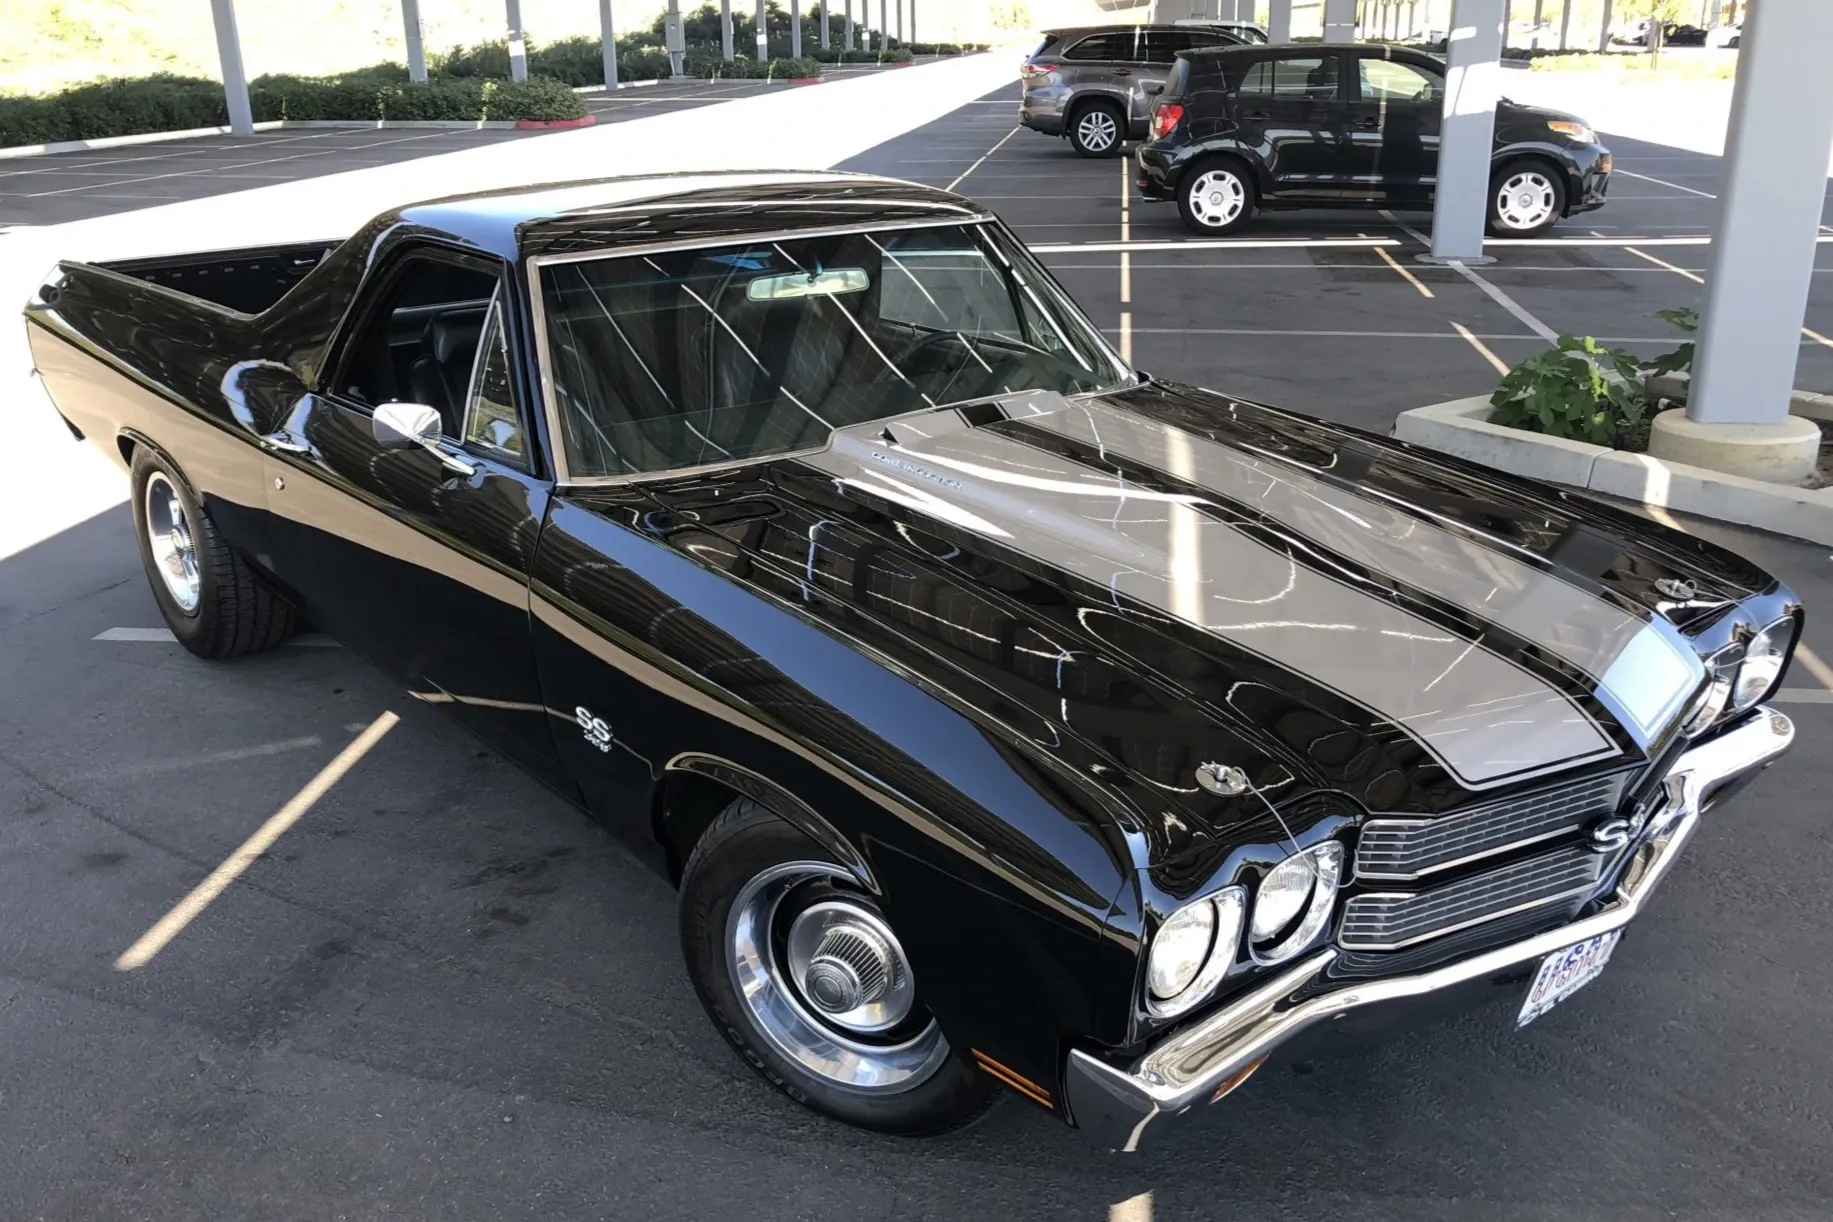 A parked 1970 Chevy El Camino SS on display